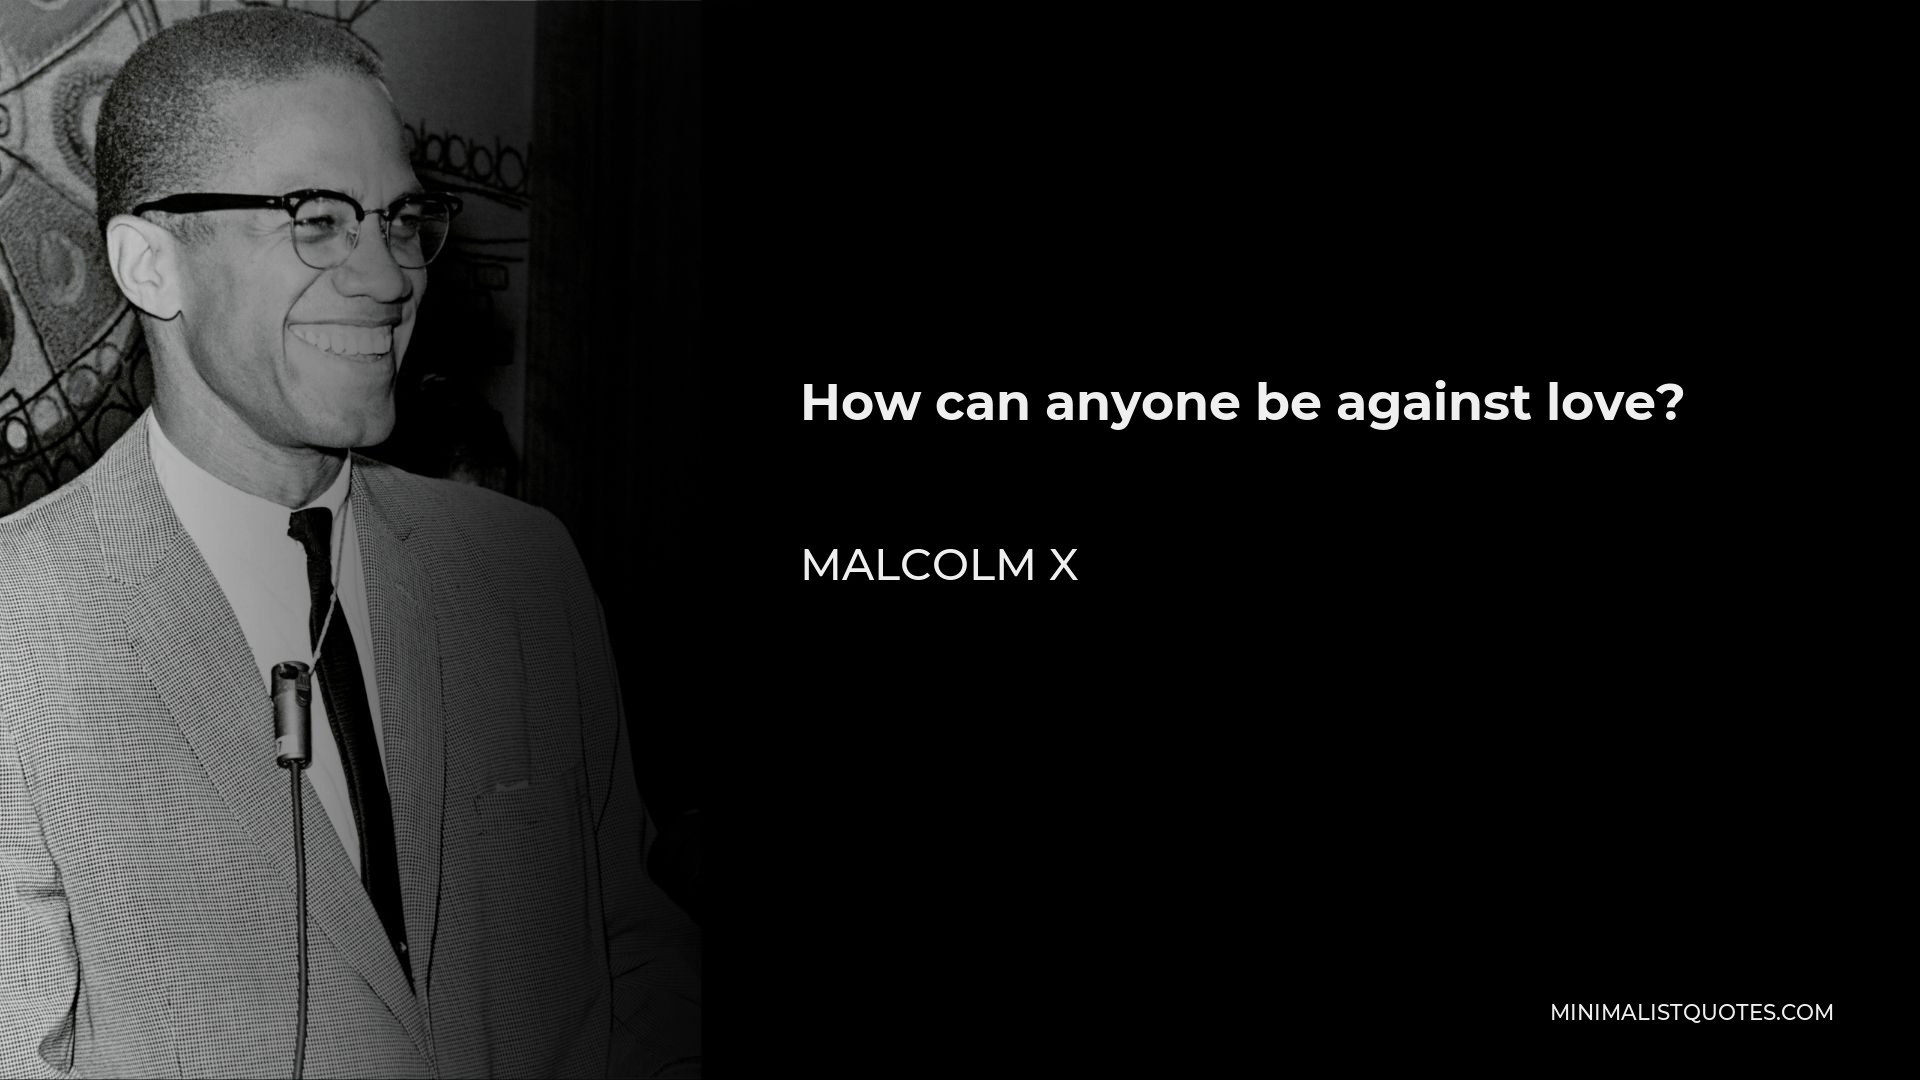 Malcolm X Quote - How can anyone be against love?